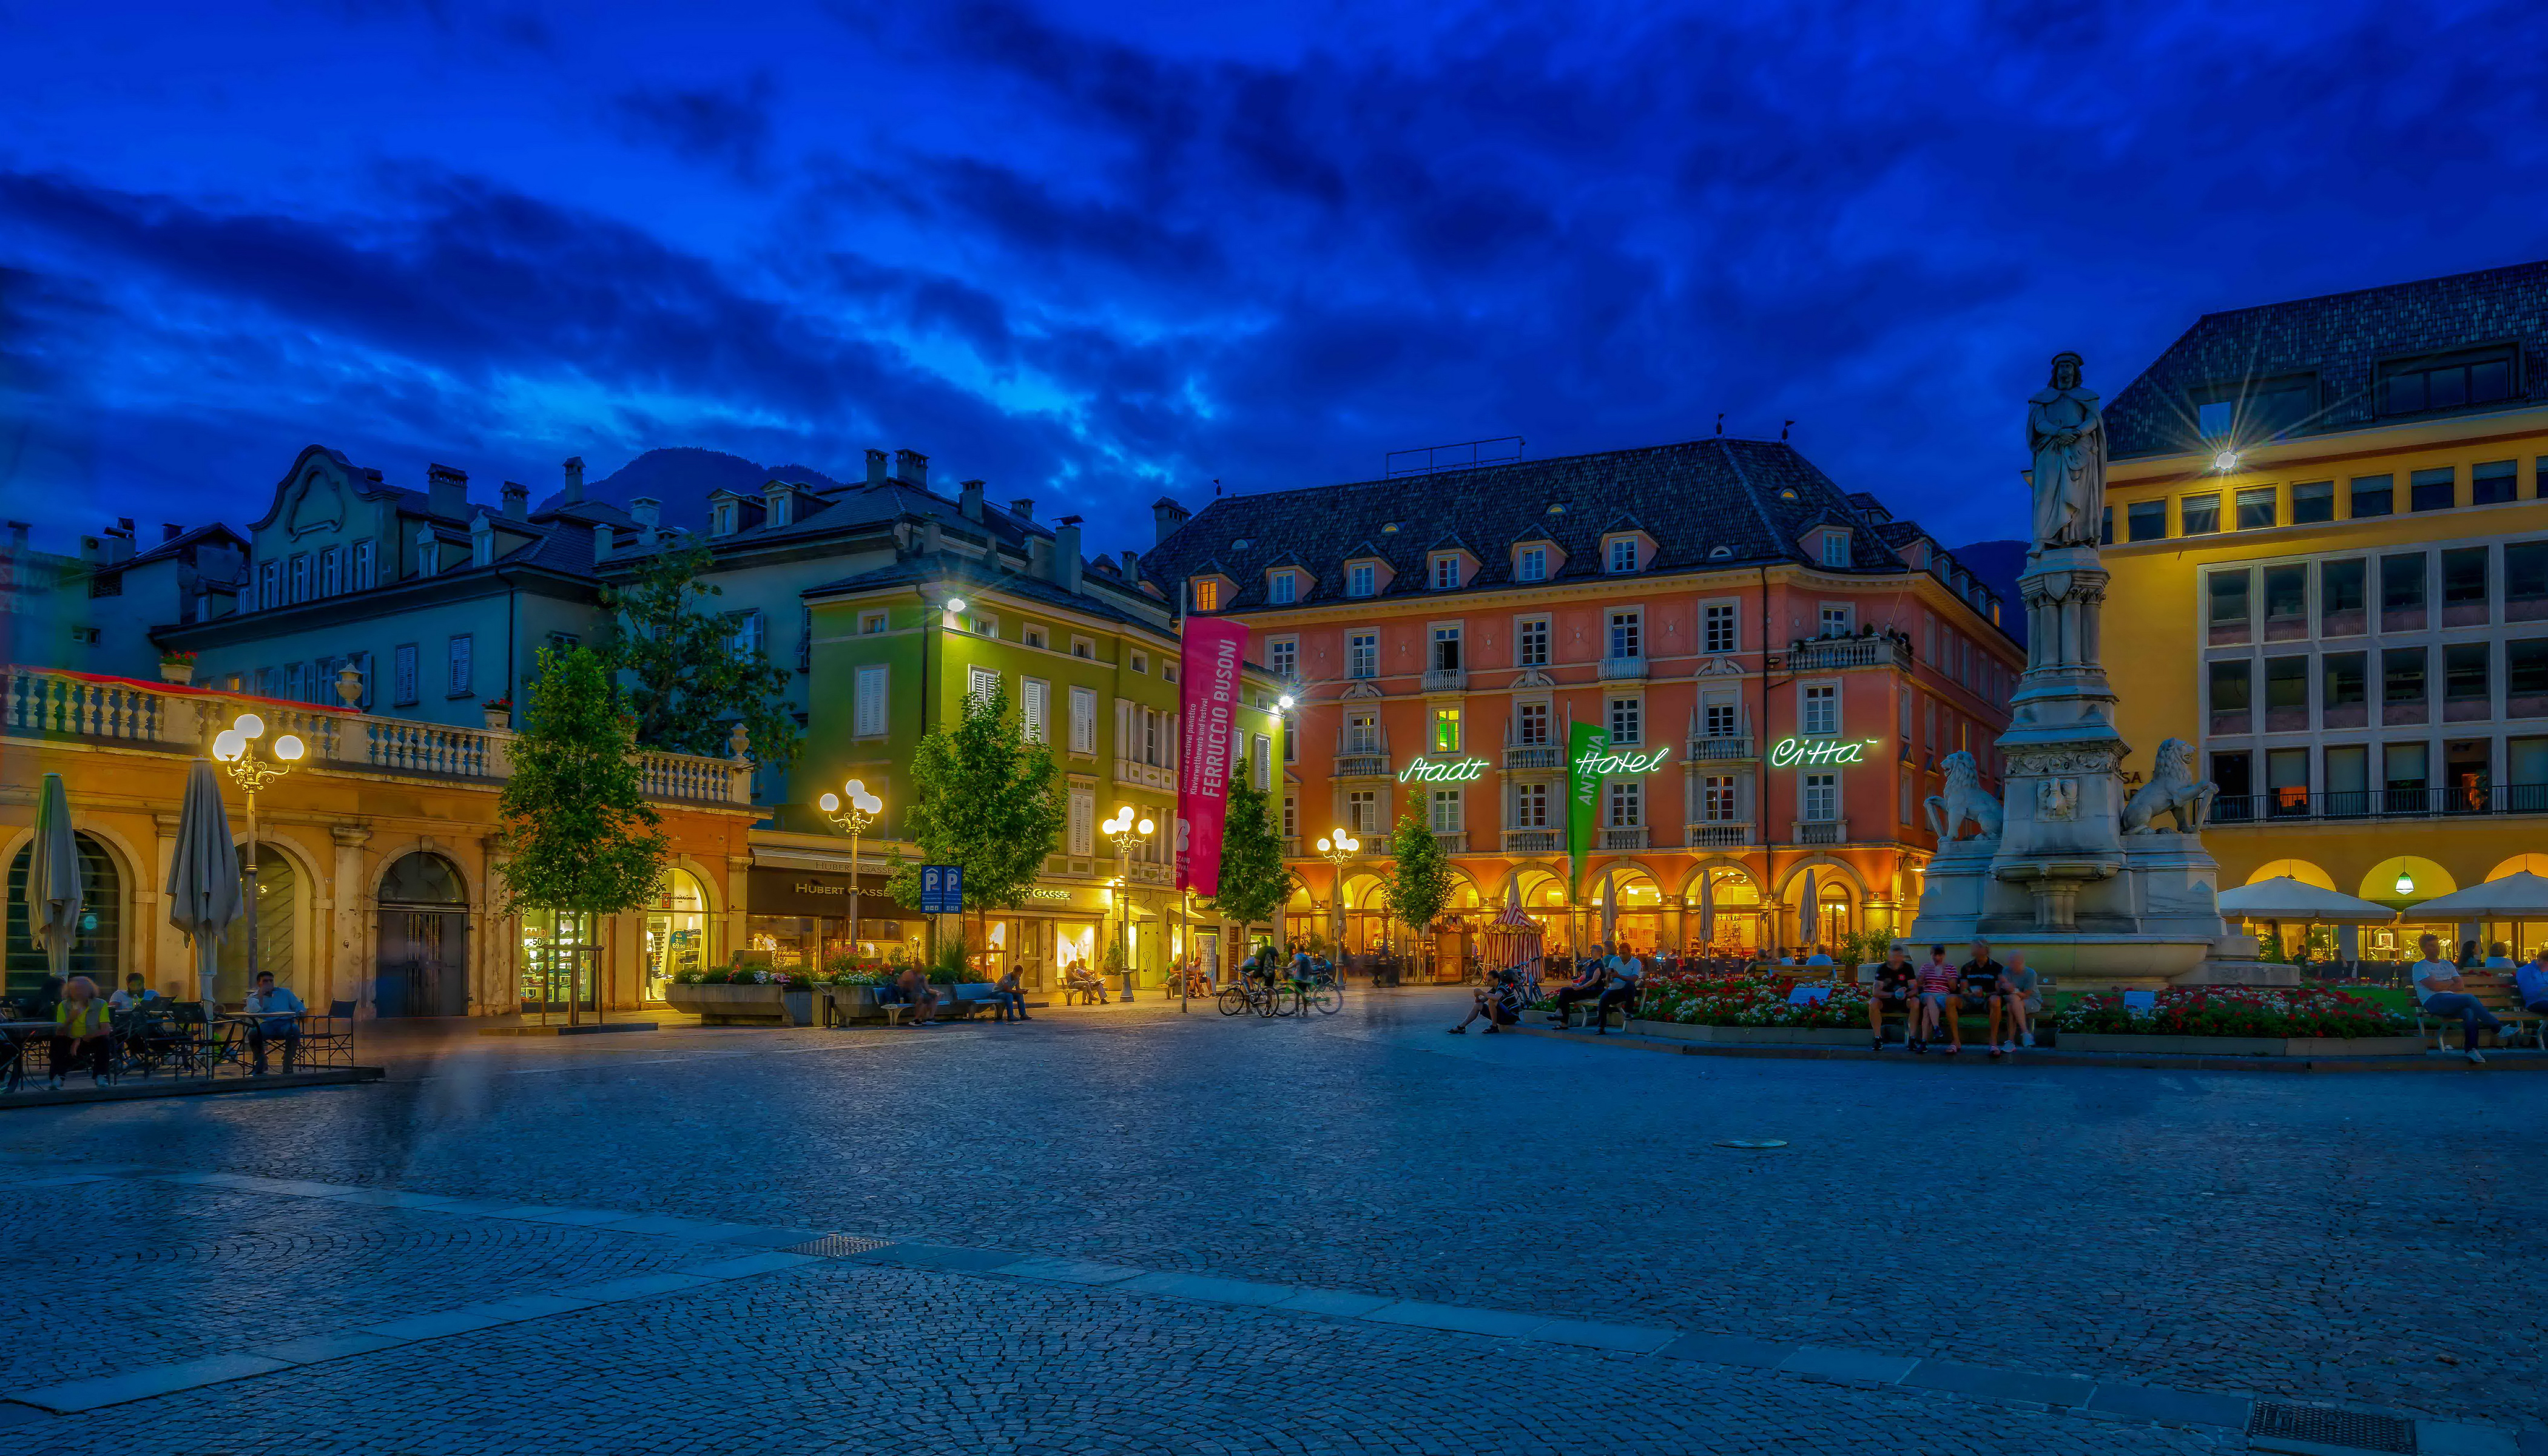 Town Square in Trentino, Italy by Klaus Mokosch